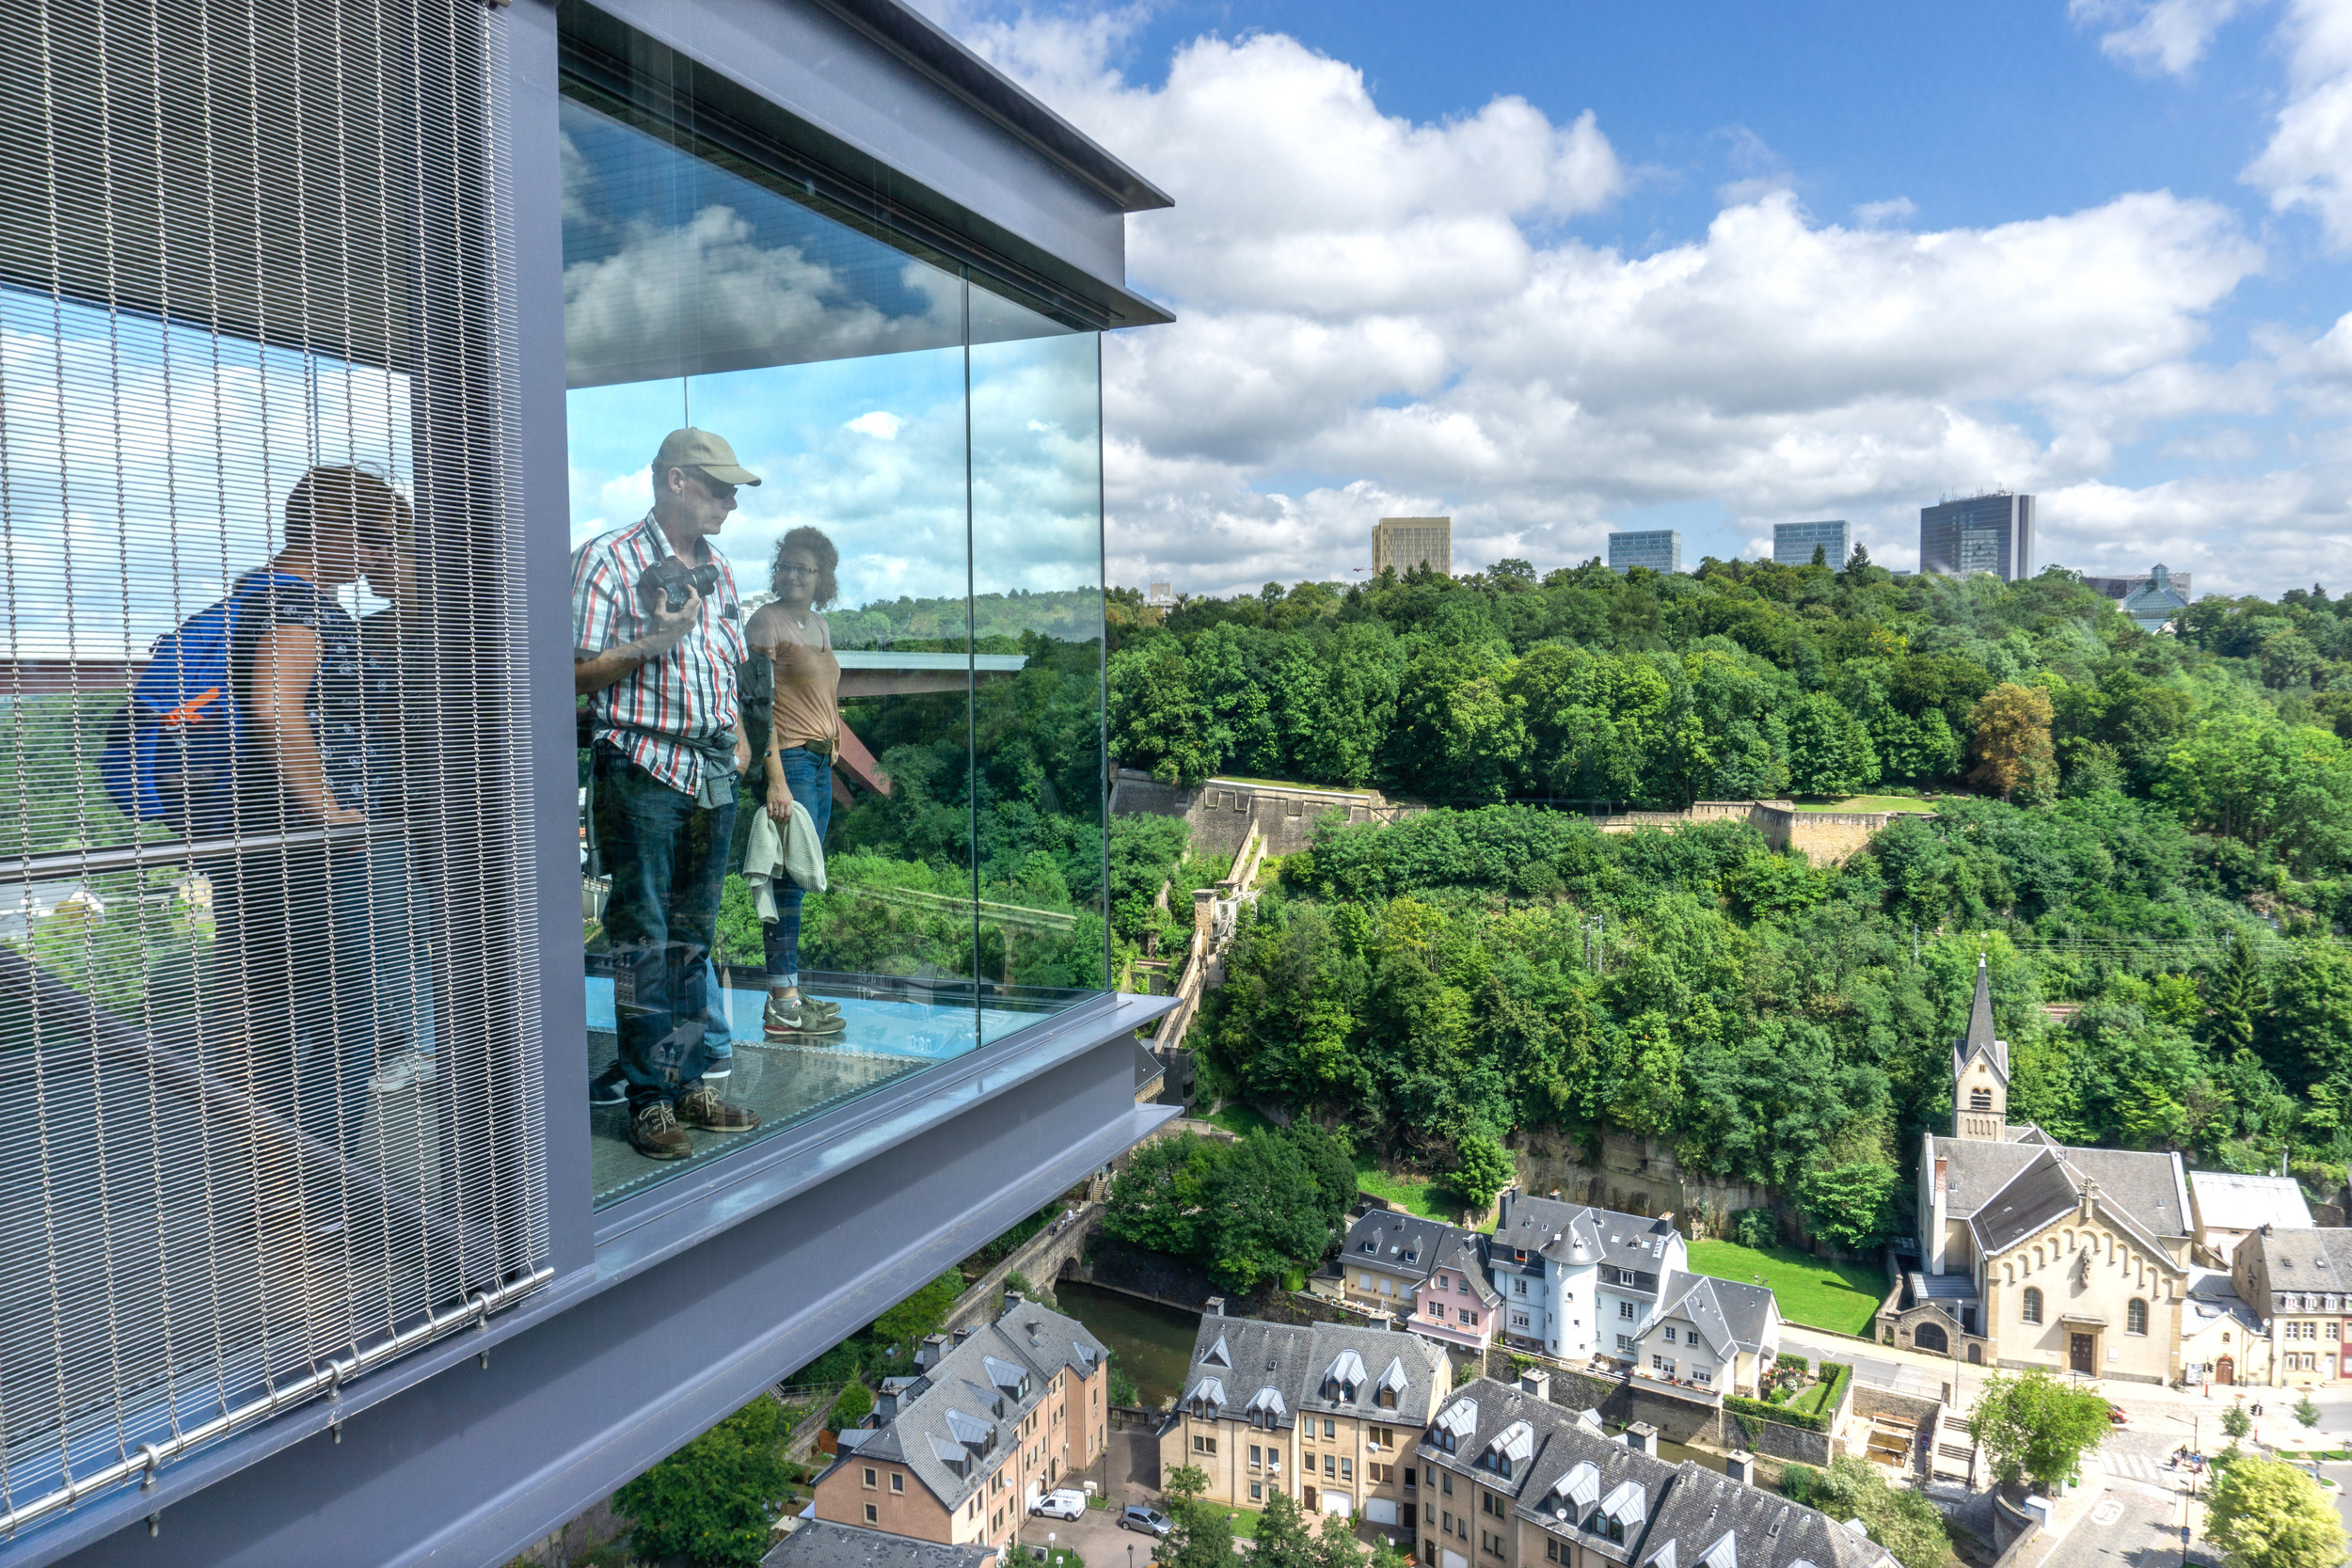 <p>A recent addition to the Luxembourg City, this glass elevator and connecting lookout provide amazing views of Pfaffenthal. It links the main park in the City Center to the lower part of the city where the Alzette River runs. Enjoy a view from above, snap a pic, and then enjoy as the views change on the ride down the 71 meters (233 feet). The elevator is free of charge and opens from 5:45 a.m. to 1 a.m. daily.</p><p><a href='https://www.msn.com/en-us/community/channel/vid-cj9pqbr0vn9in2b6ddcd8sfgpfq6x6utp44fssrv6mc2gtybw0us'>Follow us on MSN to see more of our exclusive lifestyle content.</a></p>